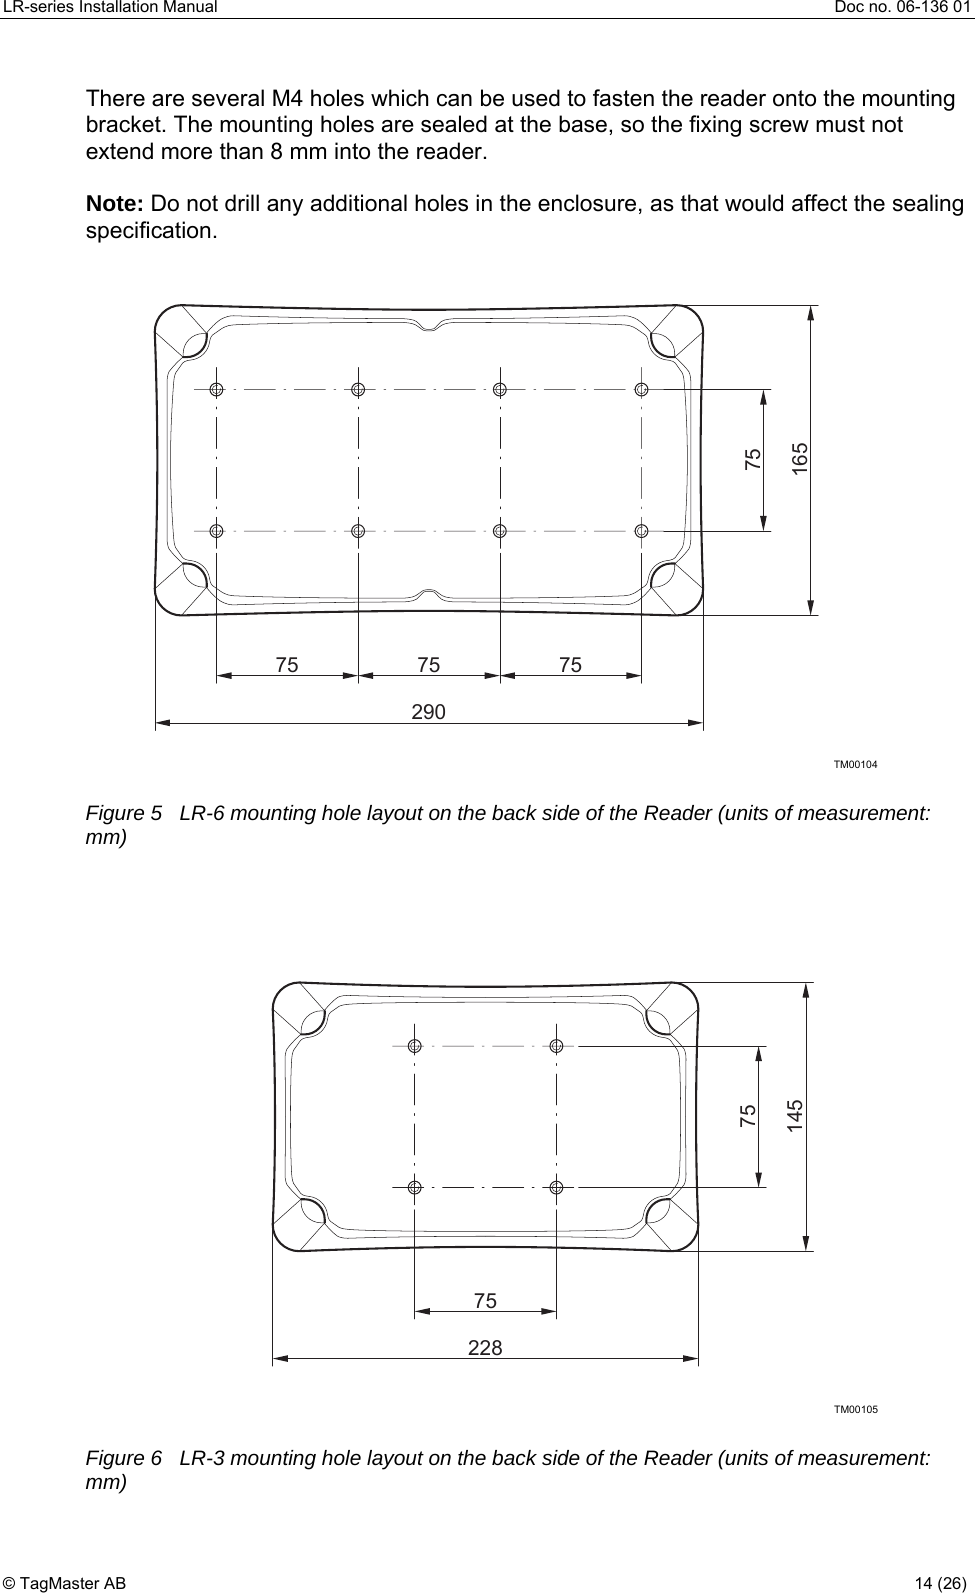 LR-series Installation Manual  Doc no. 06-136 01 There are several M4 holes which can be used to fasten the reader onto the mounting bracket. The mounting holes are sealed at the base, so the fixing screw must not extend more than 8 mm into the reader.  Note: Do not drill any additional holes in the enclosure, as that would affect the sealing specification. TM0010475 757529075165 Figure 5   LR-6 mounting hole layout on the back side of the Reader (units of measurement: mm)   TM001057522875145 Figure 6   LR-3 mounting hole layout on the back side of the Reader (units of measurement: mm) © TagMaster AB  14 (26)   